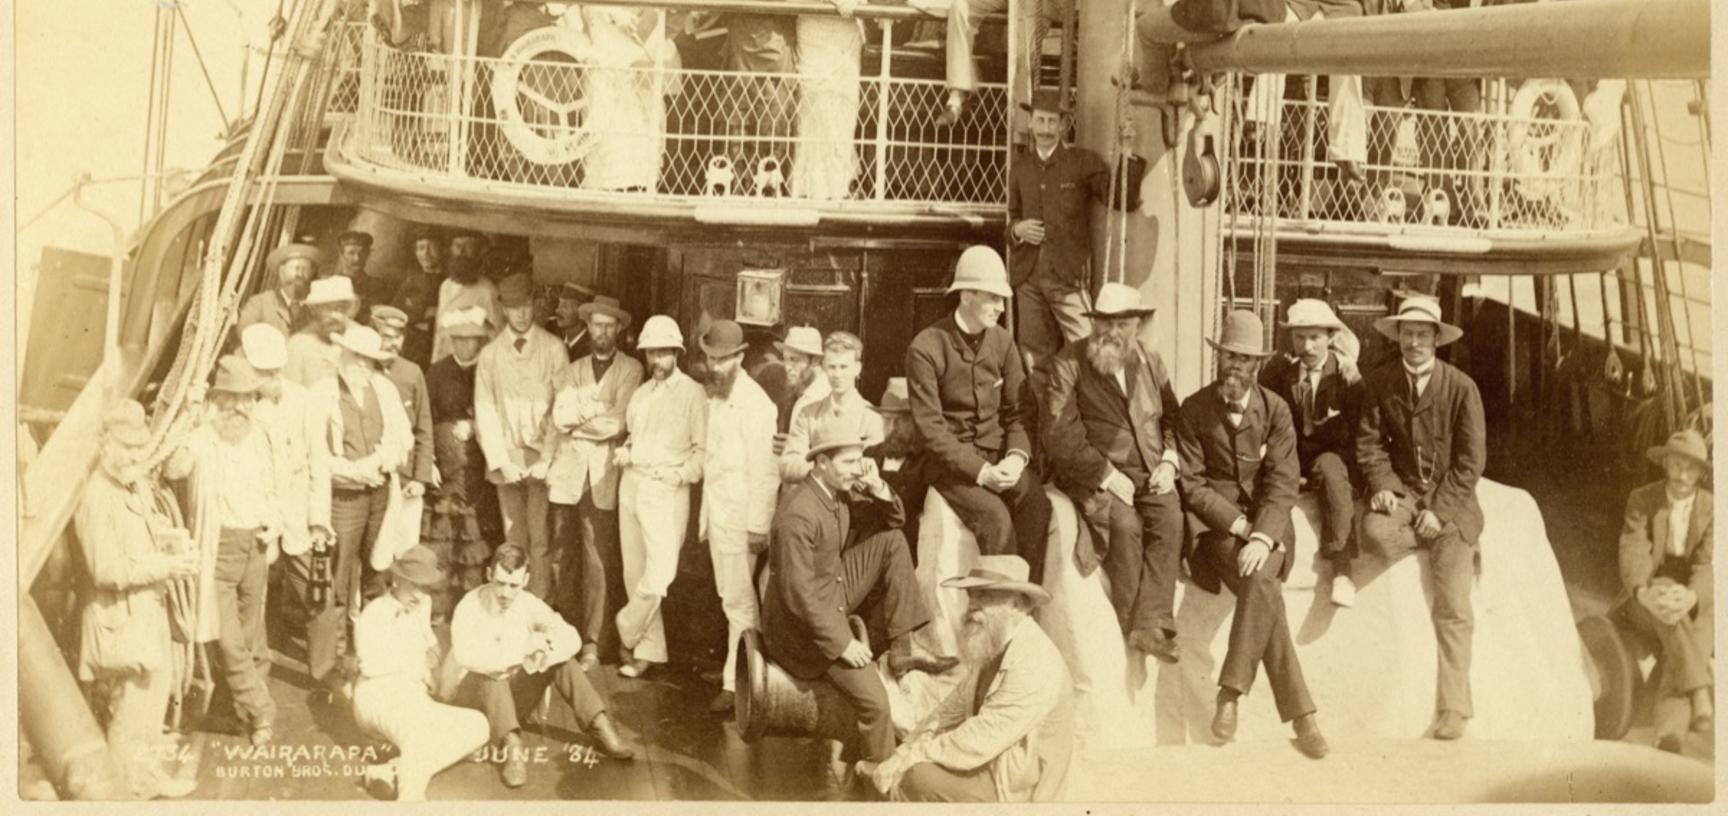 Passengers on board the deck of the S.S. Wairarapa, the Union Line steamship which in June and July 1884 made two voyages to the South Seas. Photograph by Alfred Burton for the Burton Brothers studio (Dunedin). June 1884.